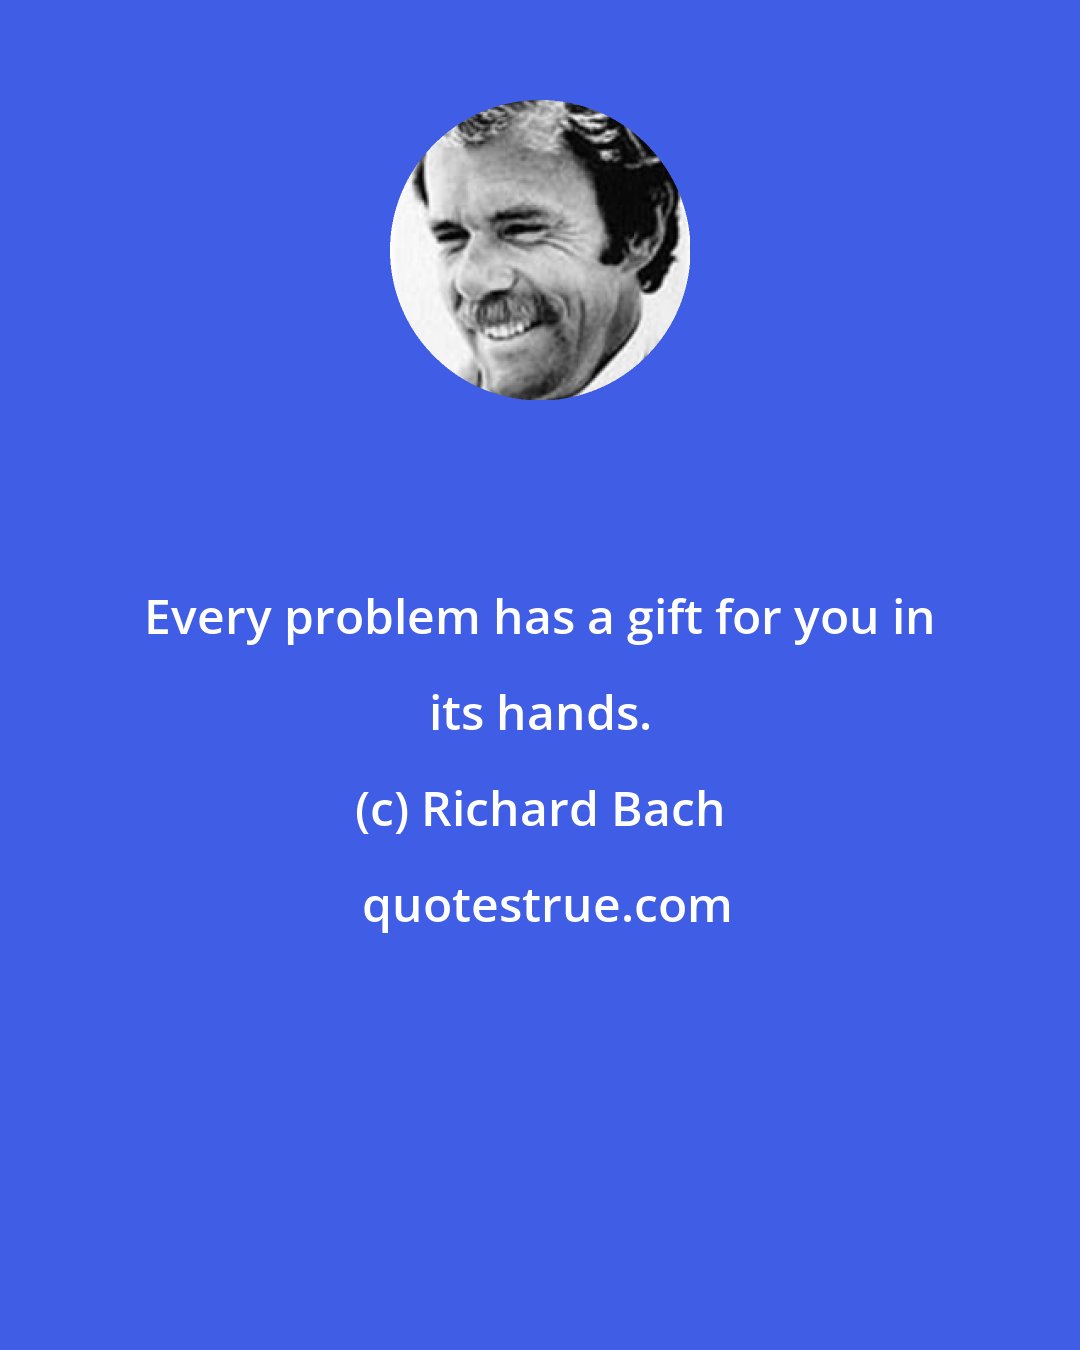 Richard Bach: Every problem has a gift for you in its hands.